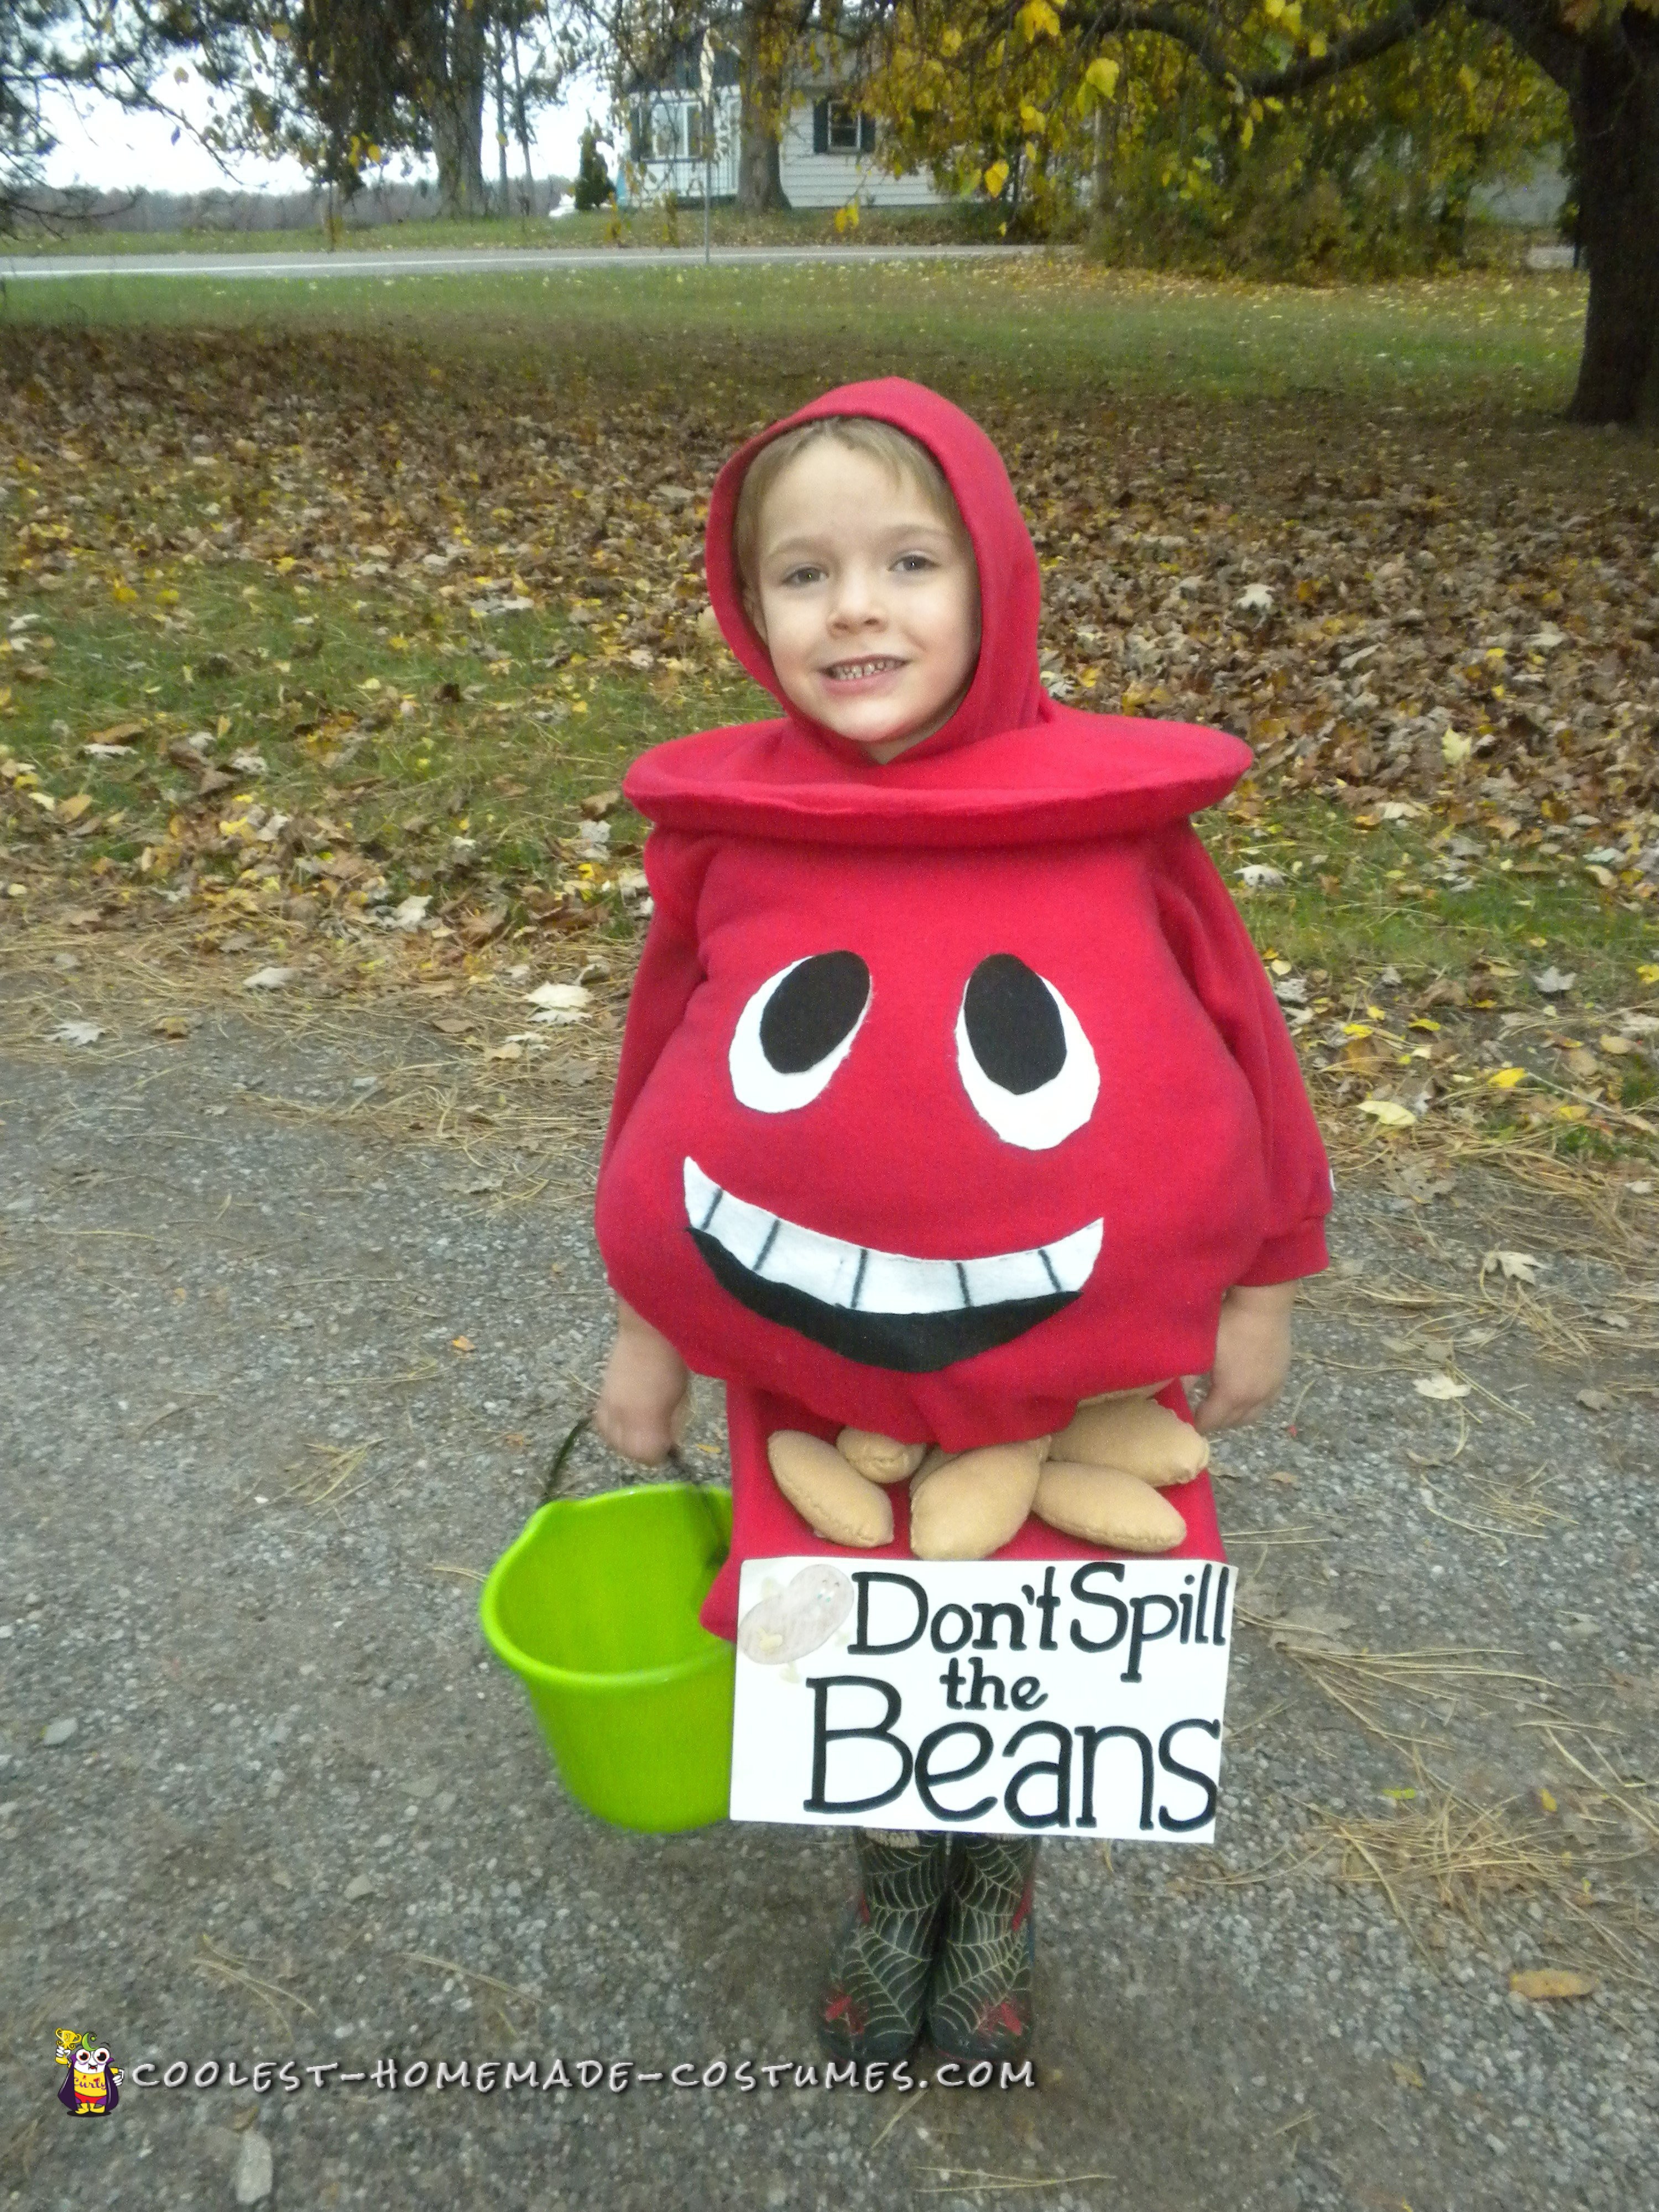 Creative "Don't Spill the Beans" Costume